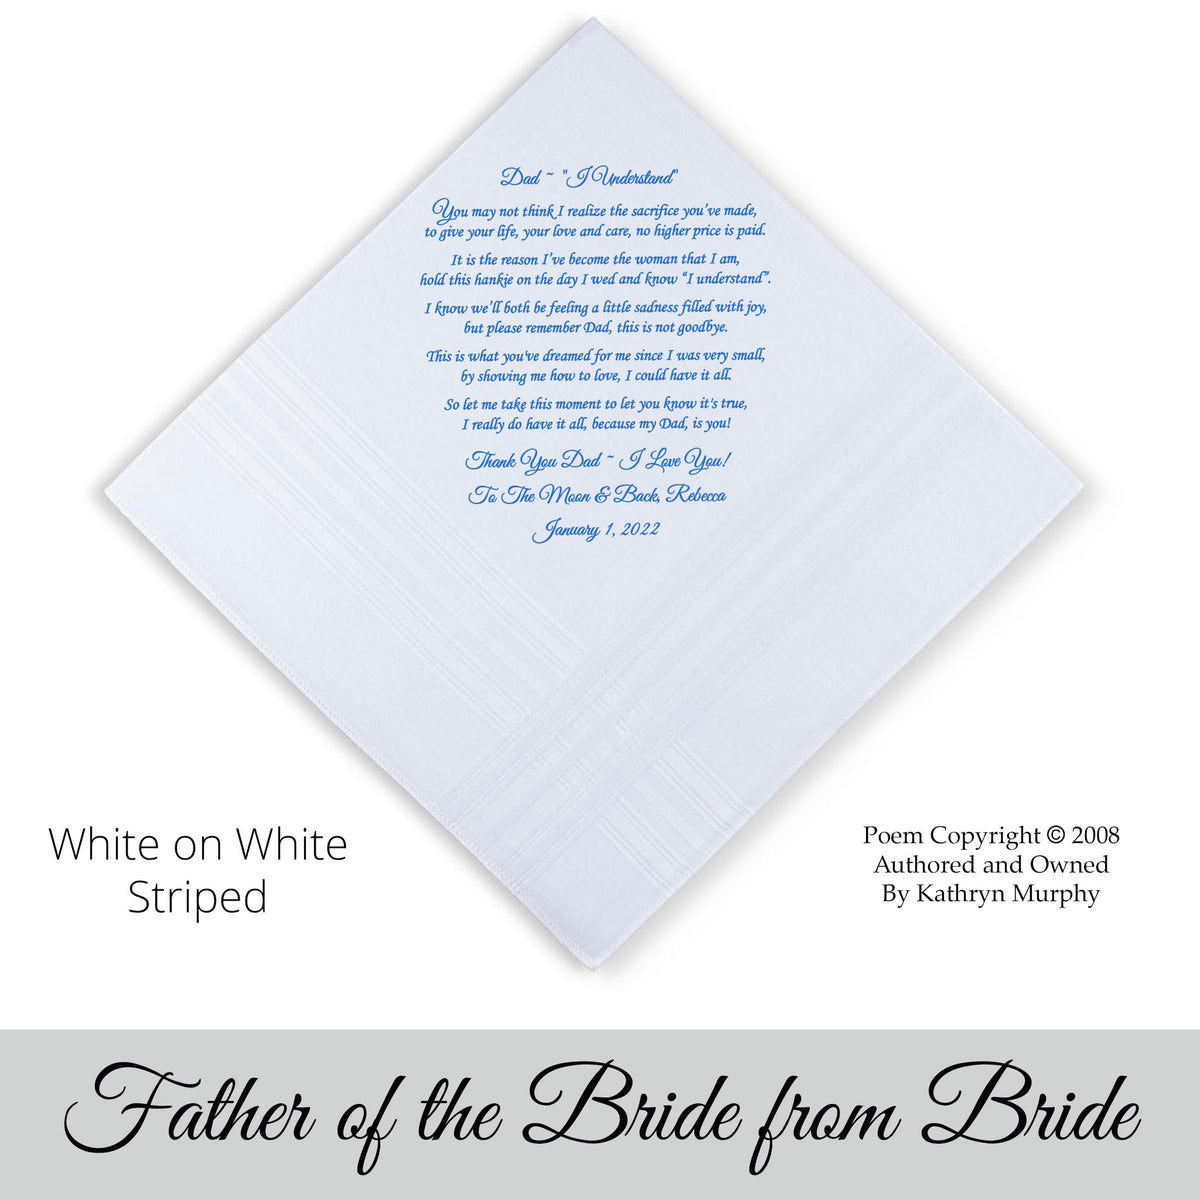 Father of the Bride Wedding Hankie with the poem &quot;Dad I Understand&quot;